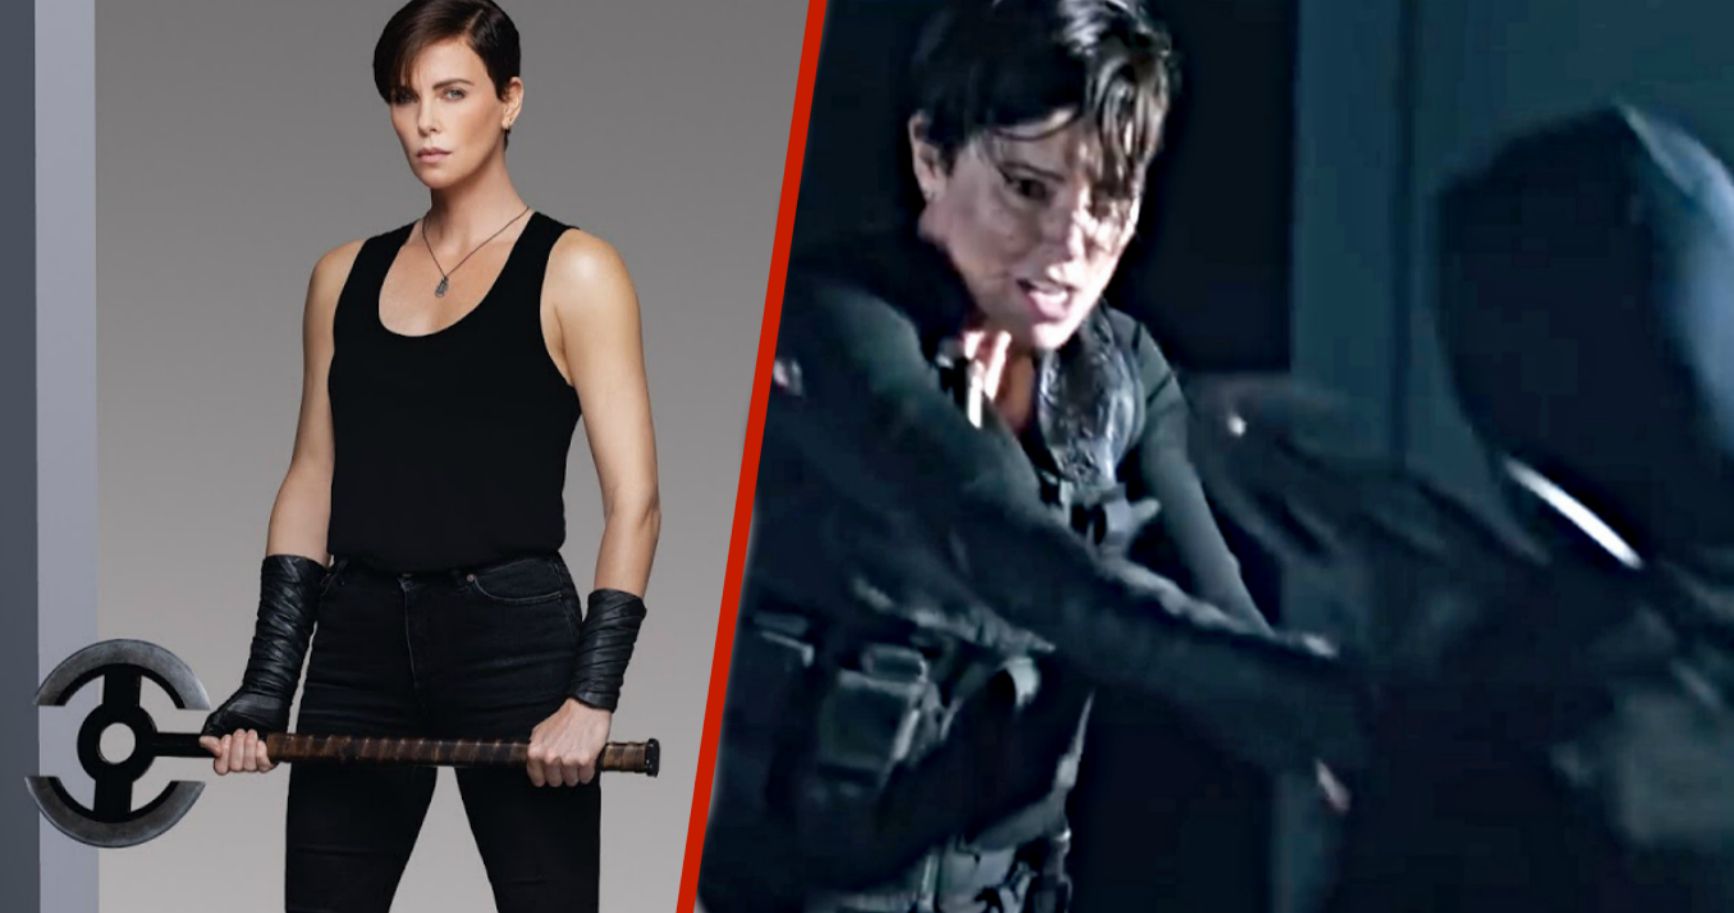 Charlize Theron Strikes Hard in The Old Guard Axe Training Video